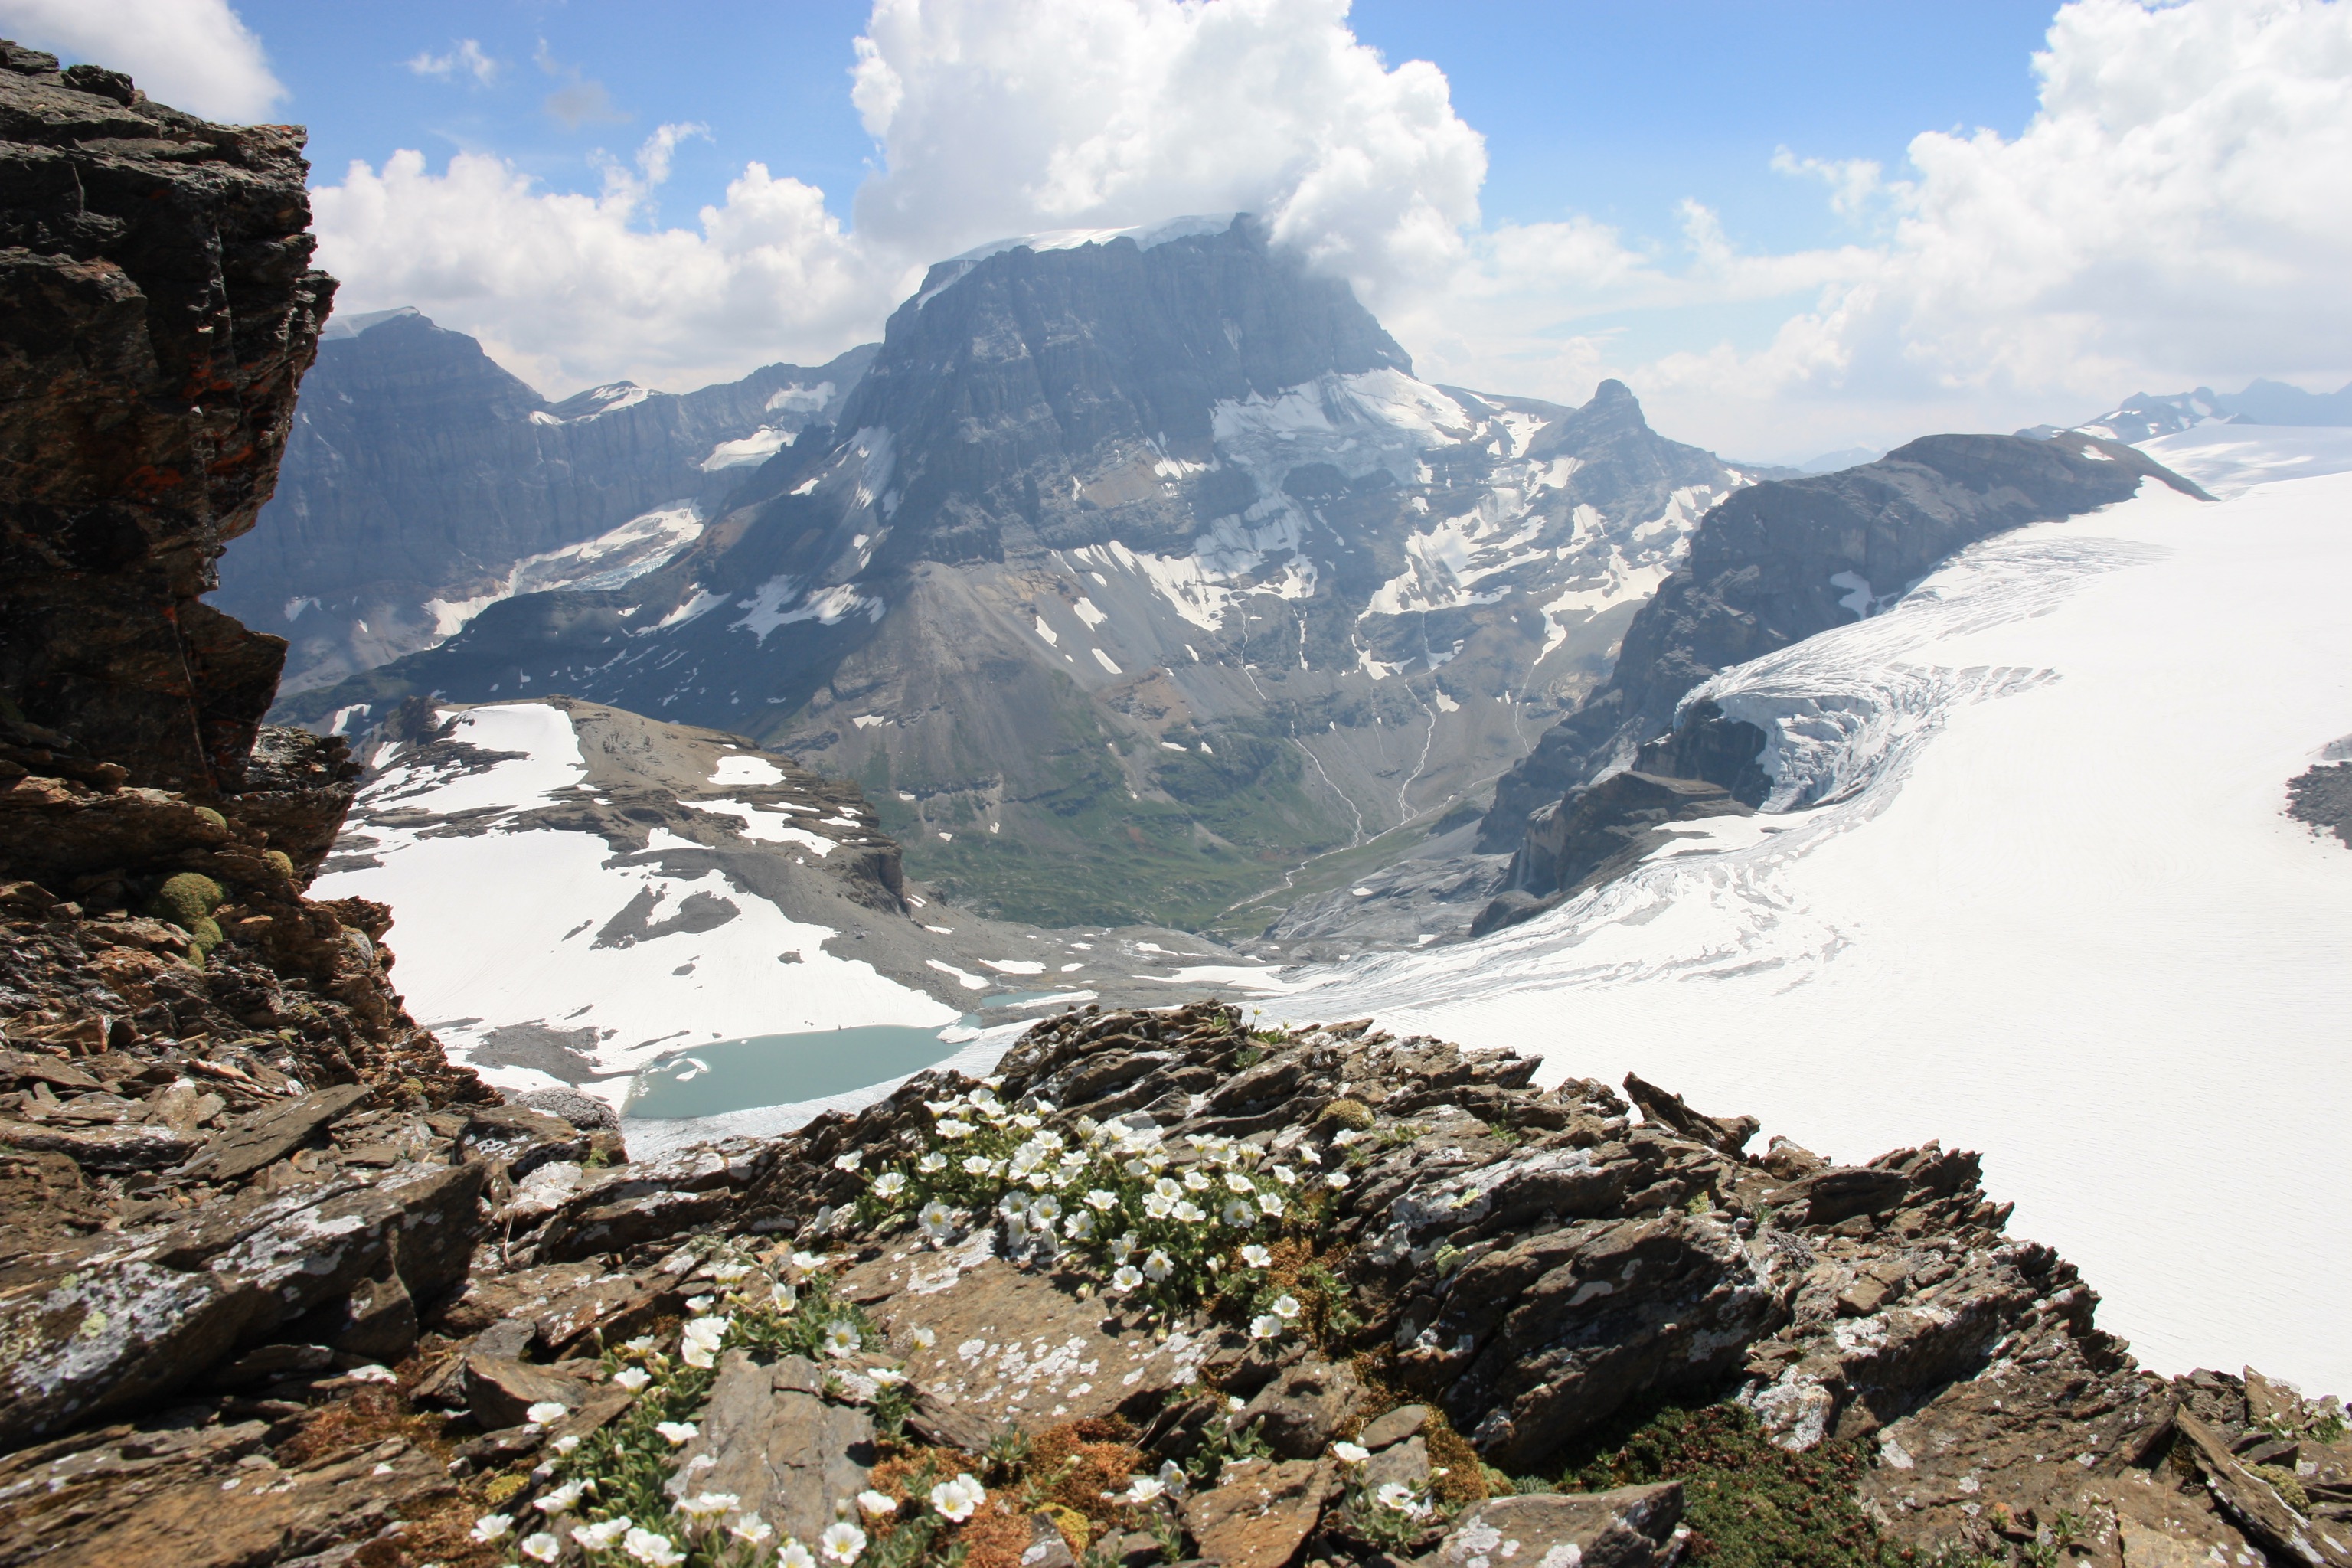 A photo of the Tödi in the background (highest peak in Glarus alps) and Claridenfirn glacier from the ridge of Gemsfairenstock with alpine flowers in the foreground.